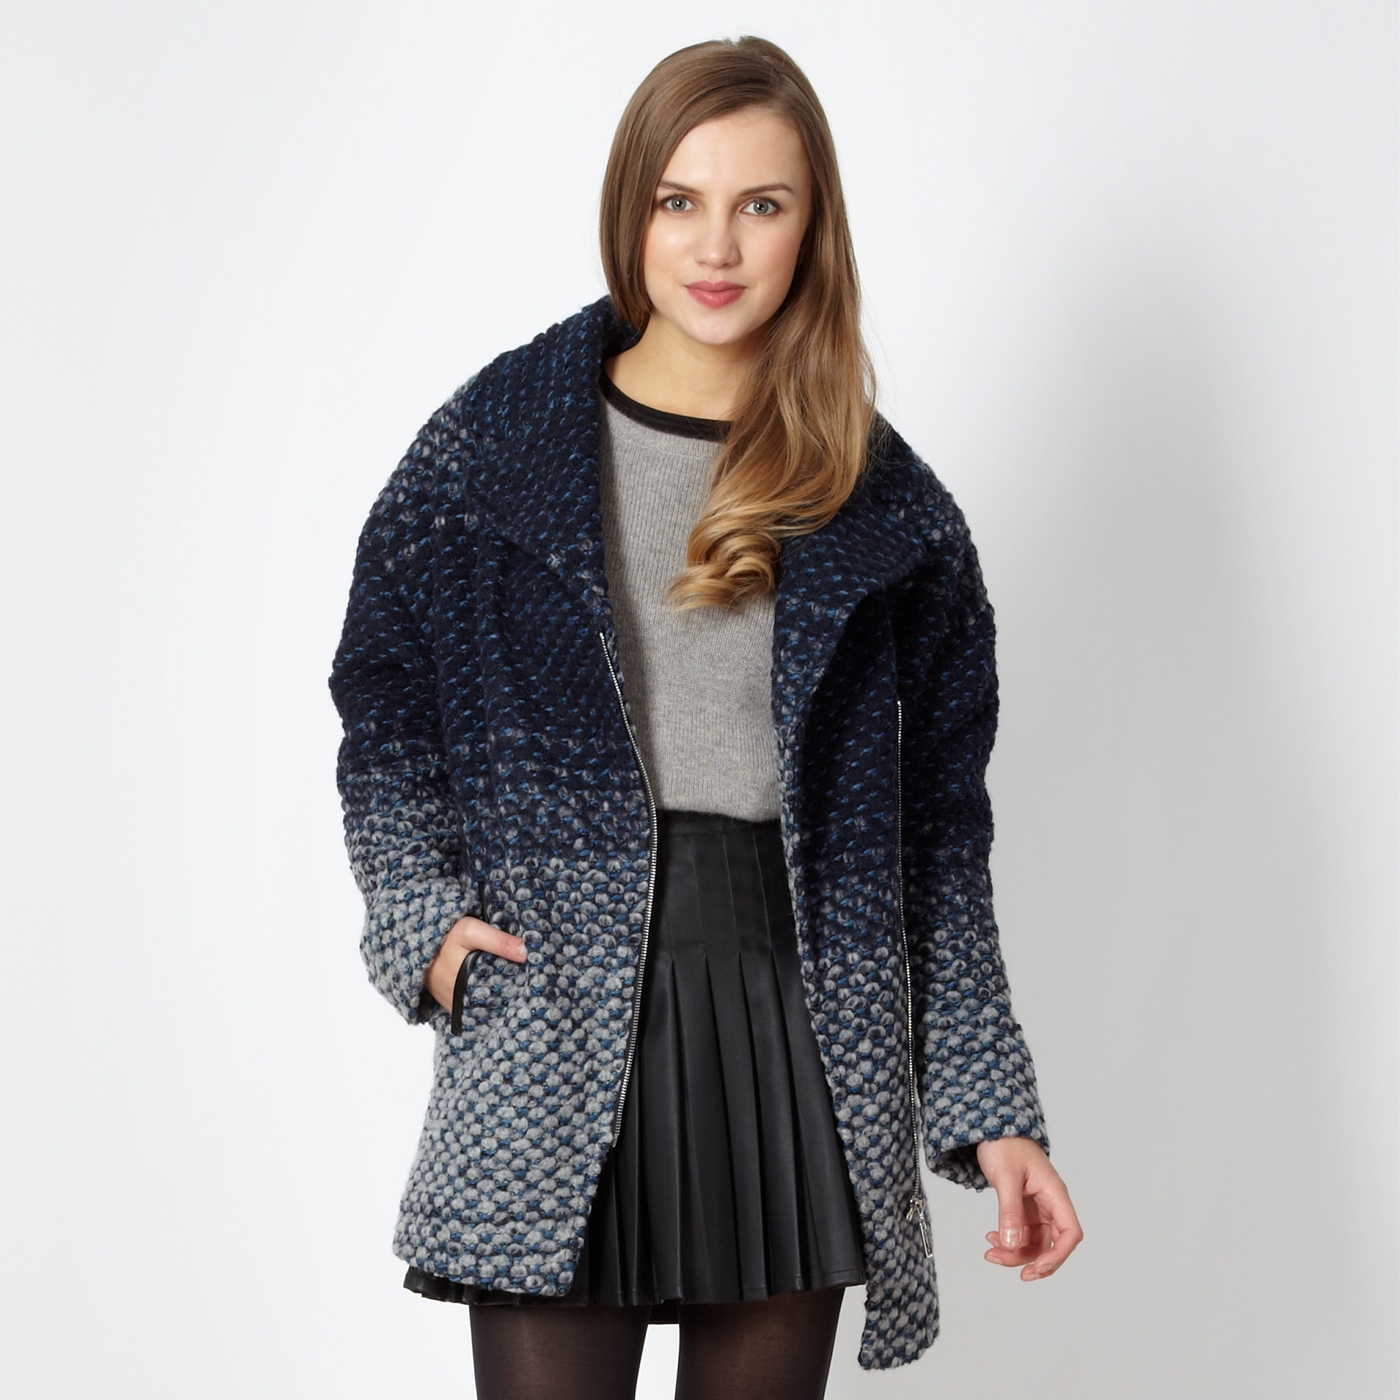 Butterfly by Matthew Williamson Designer blue knitted textured coat